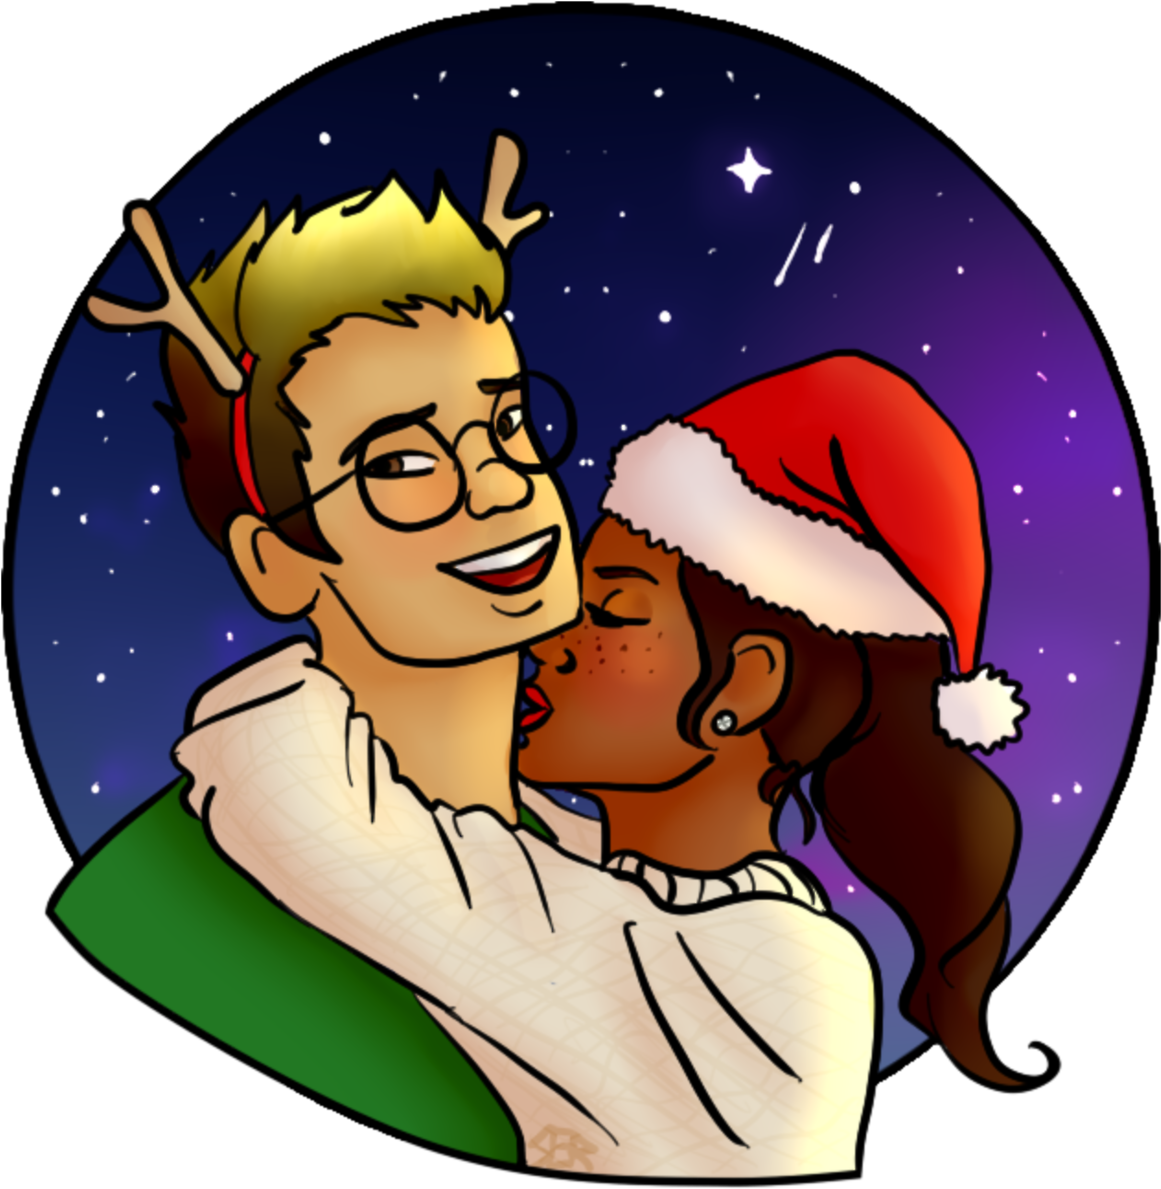 Merry Christmas And Happy Holidays All I've Been Very - Cartoon (1280x1400)